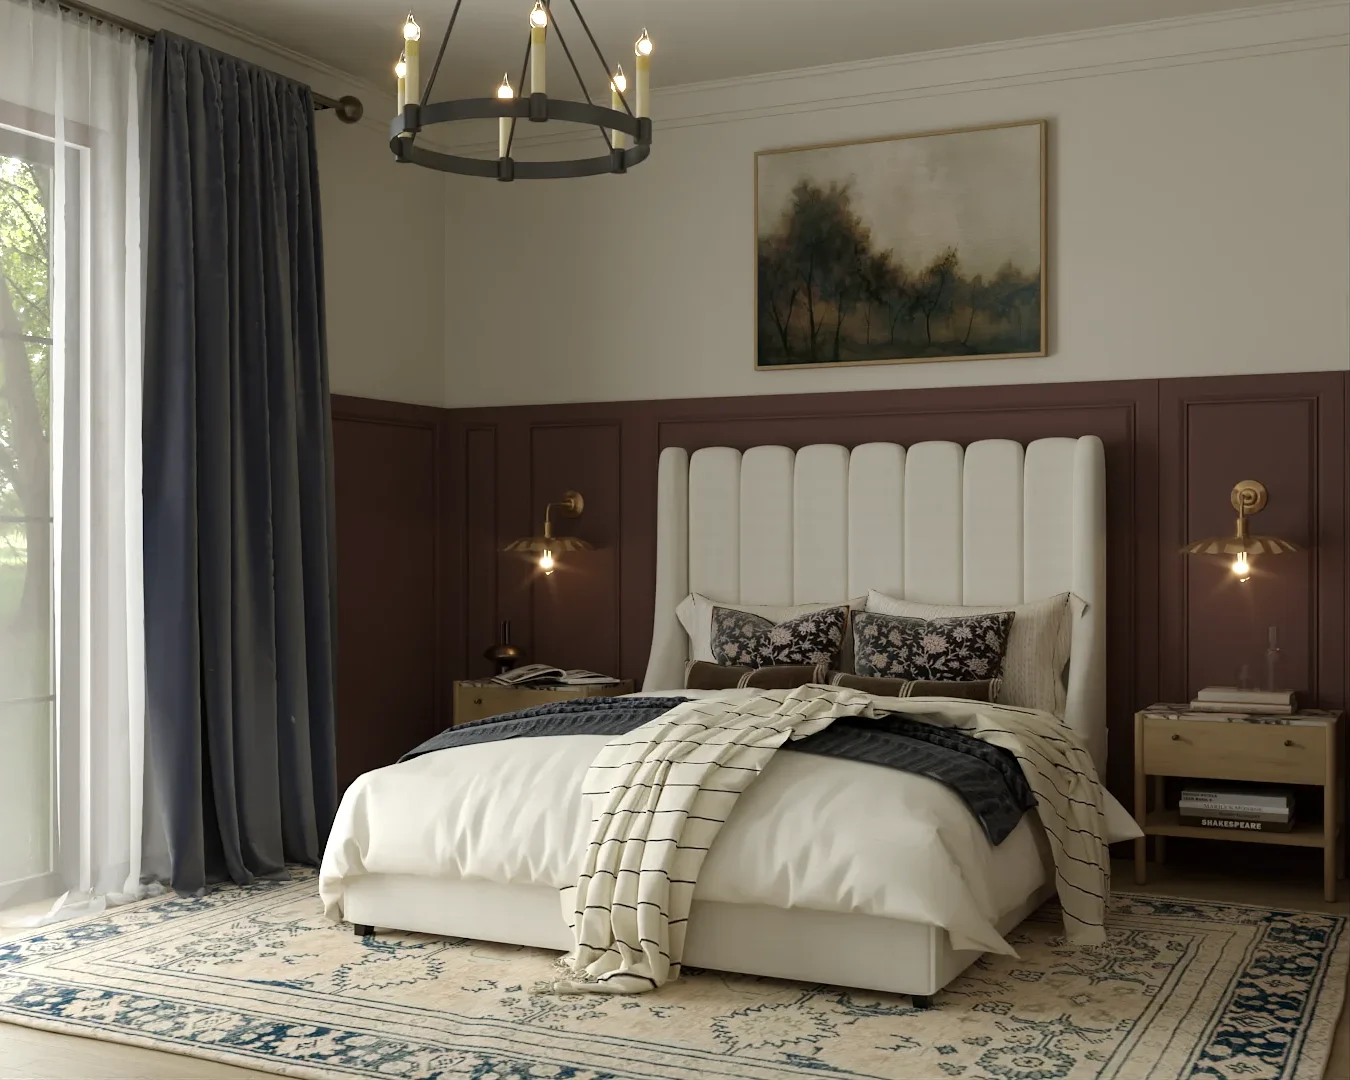 An elegant bedroom featuring classic decor with a plush bed, chic chandelier, and rich accent colors. The design creates a serene and stylish retreat, perfect for relaxation and comfort. Design by Debora, an online interior design service.